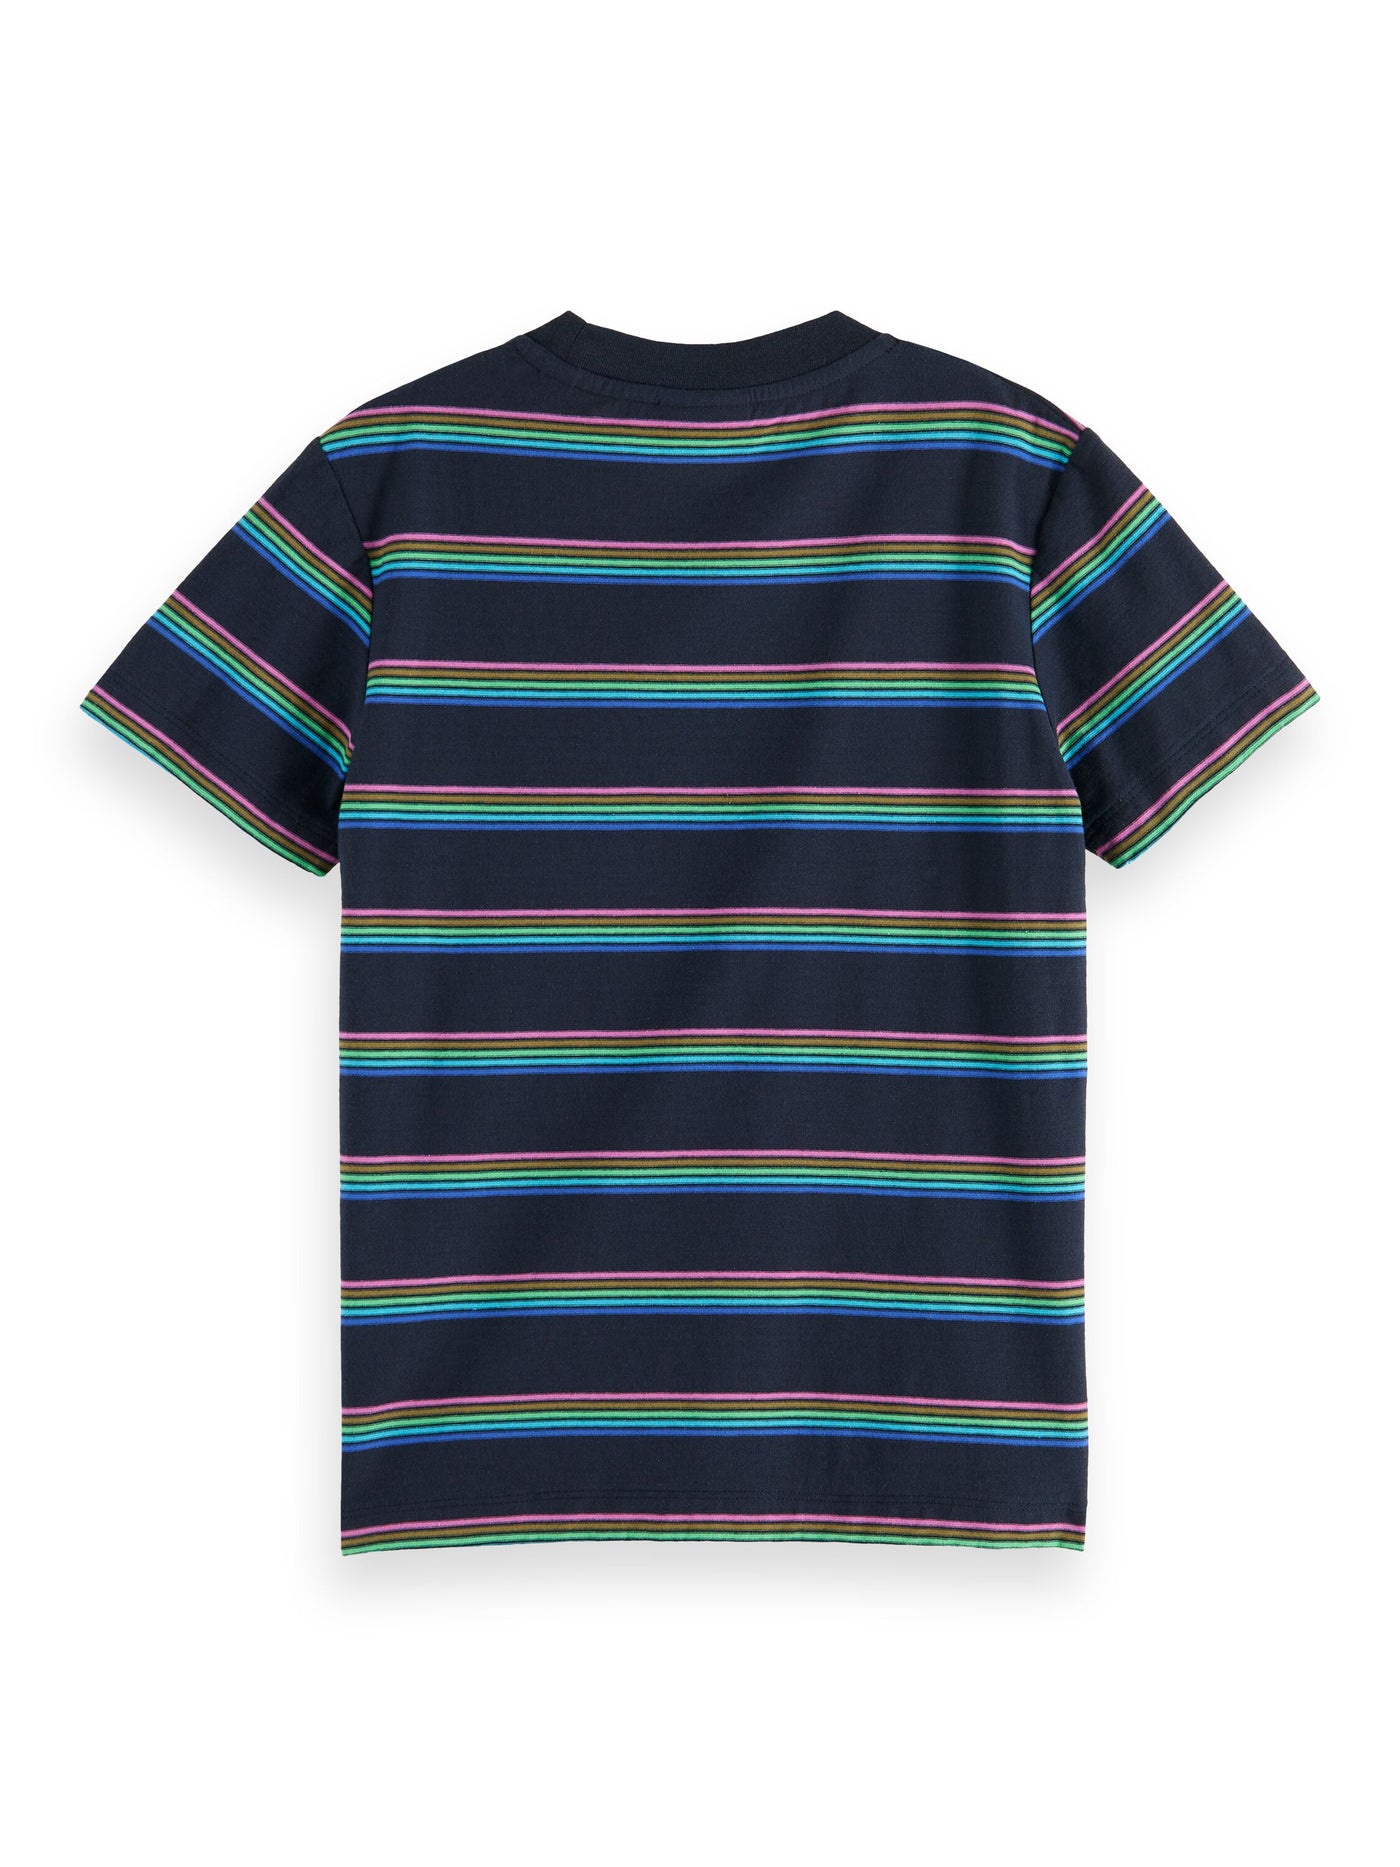 Relaxed Fit Yarn Dyed Stripe T Shirt